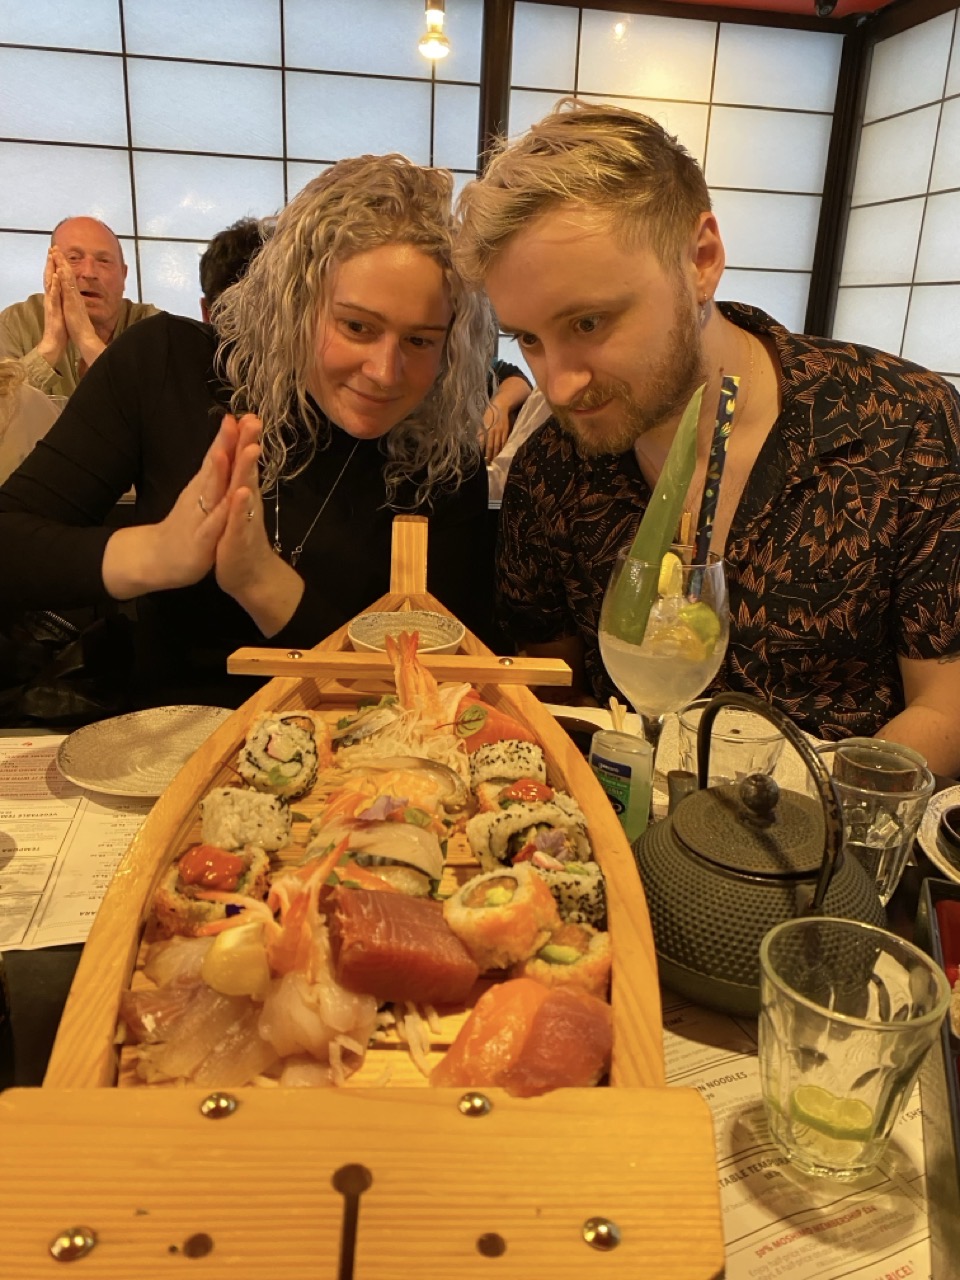 Sophie and Joe looking at a massive boat of sushi.